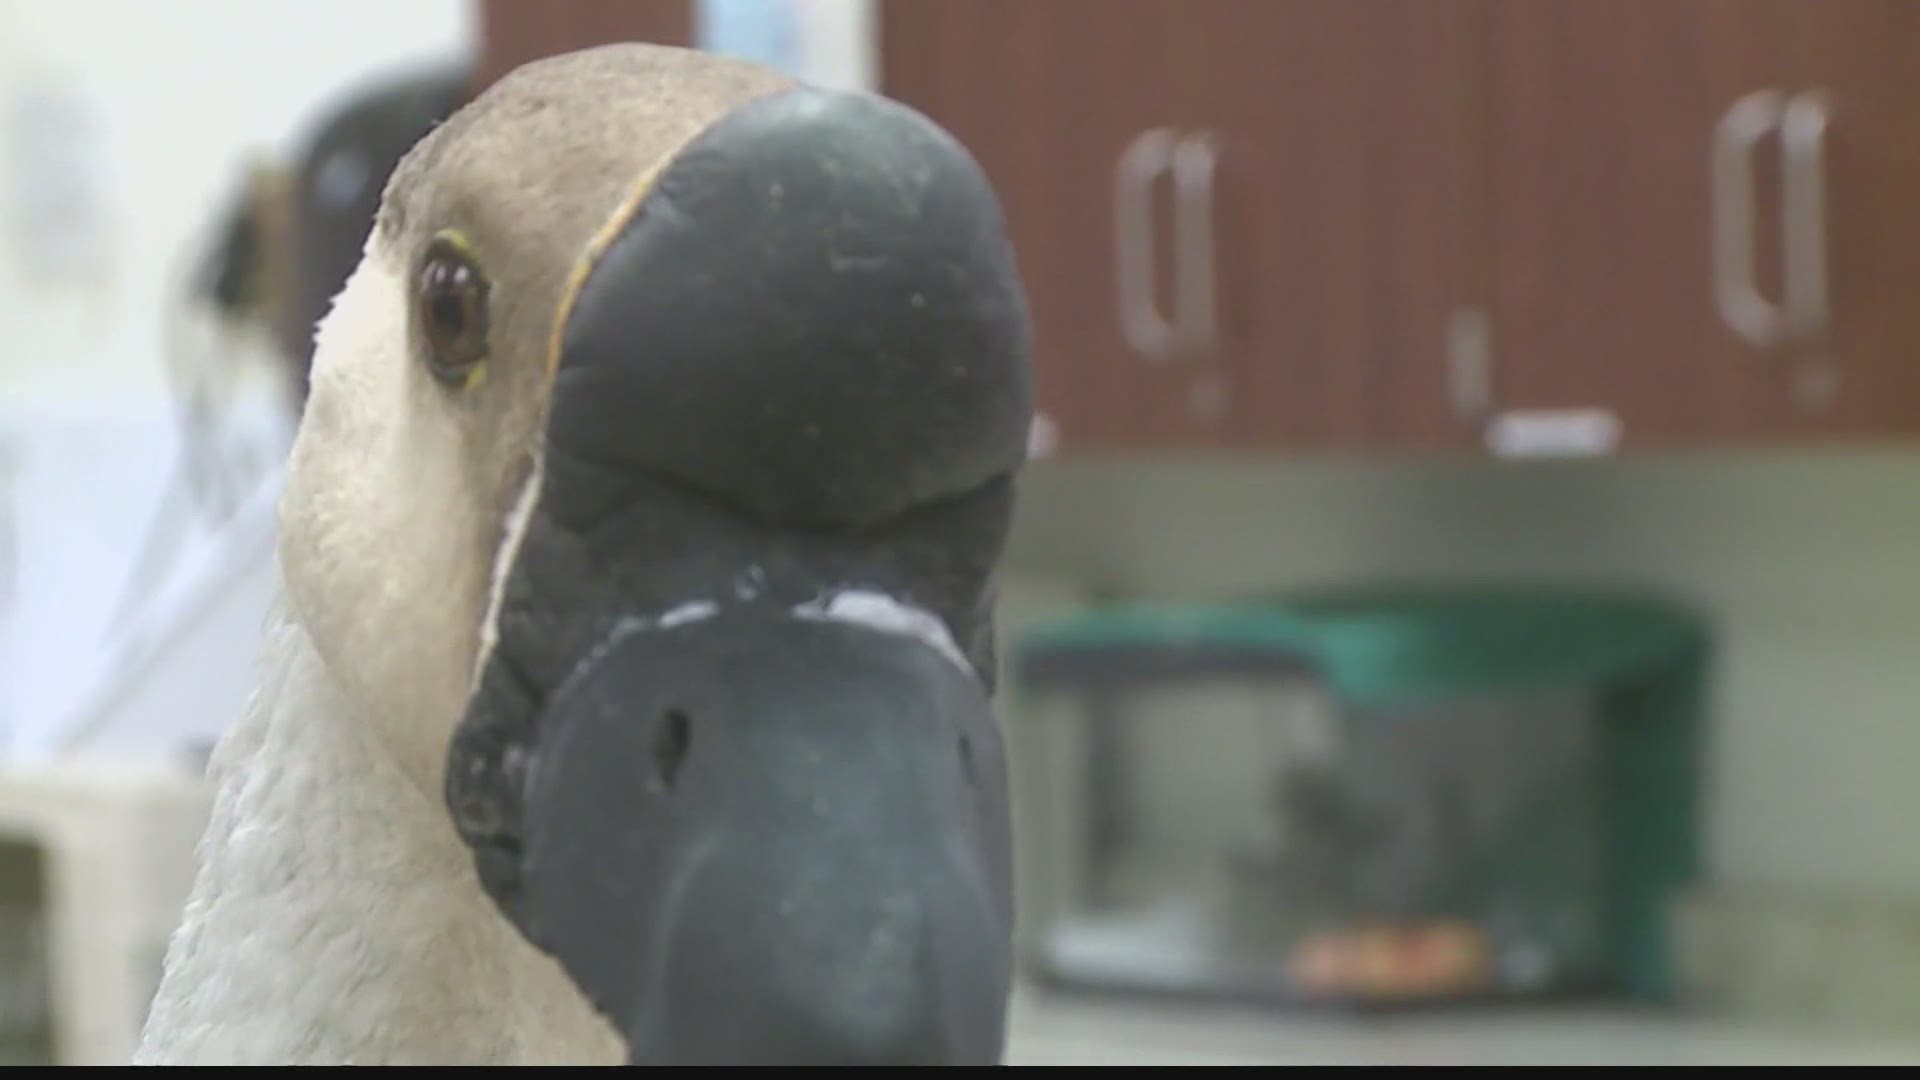 A goose gets a fresh start, thanks to volunteers with a 3D printer.